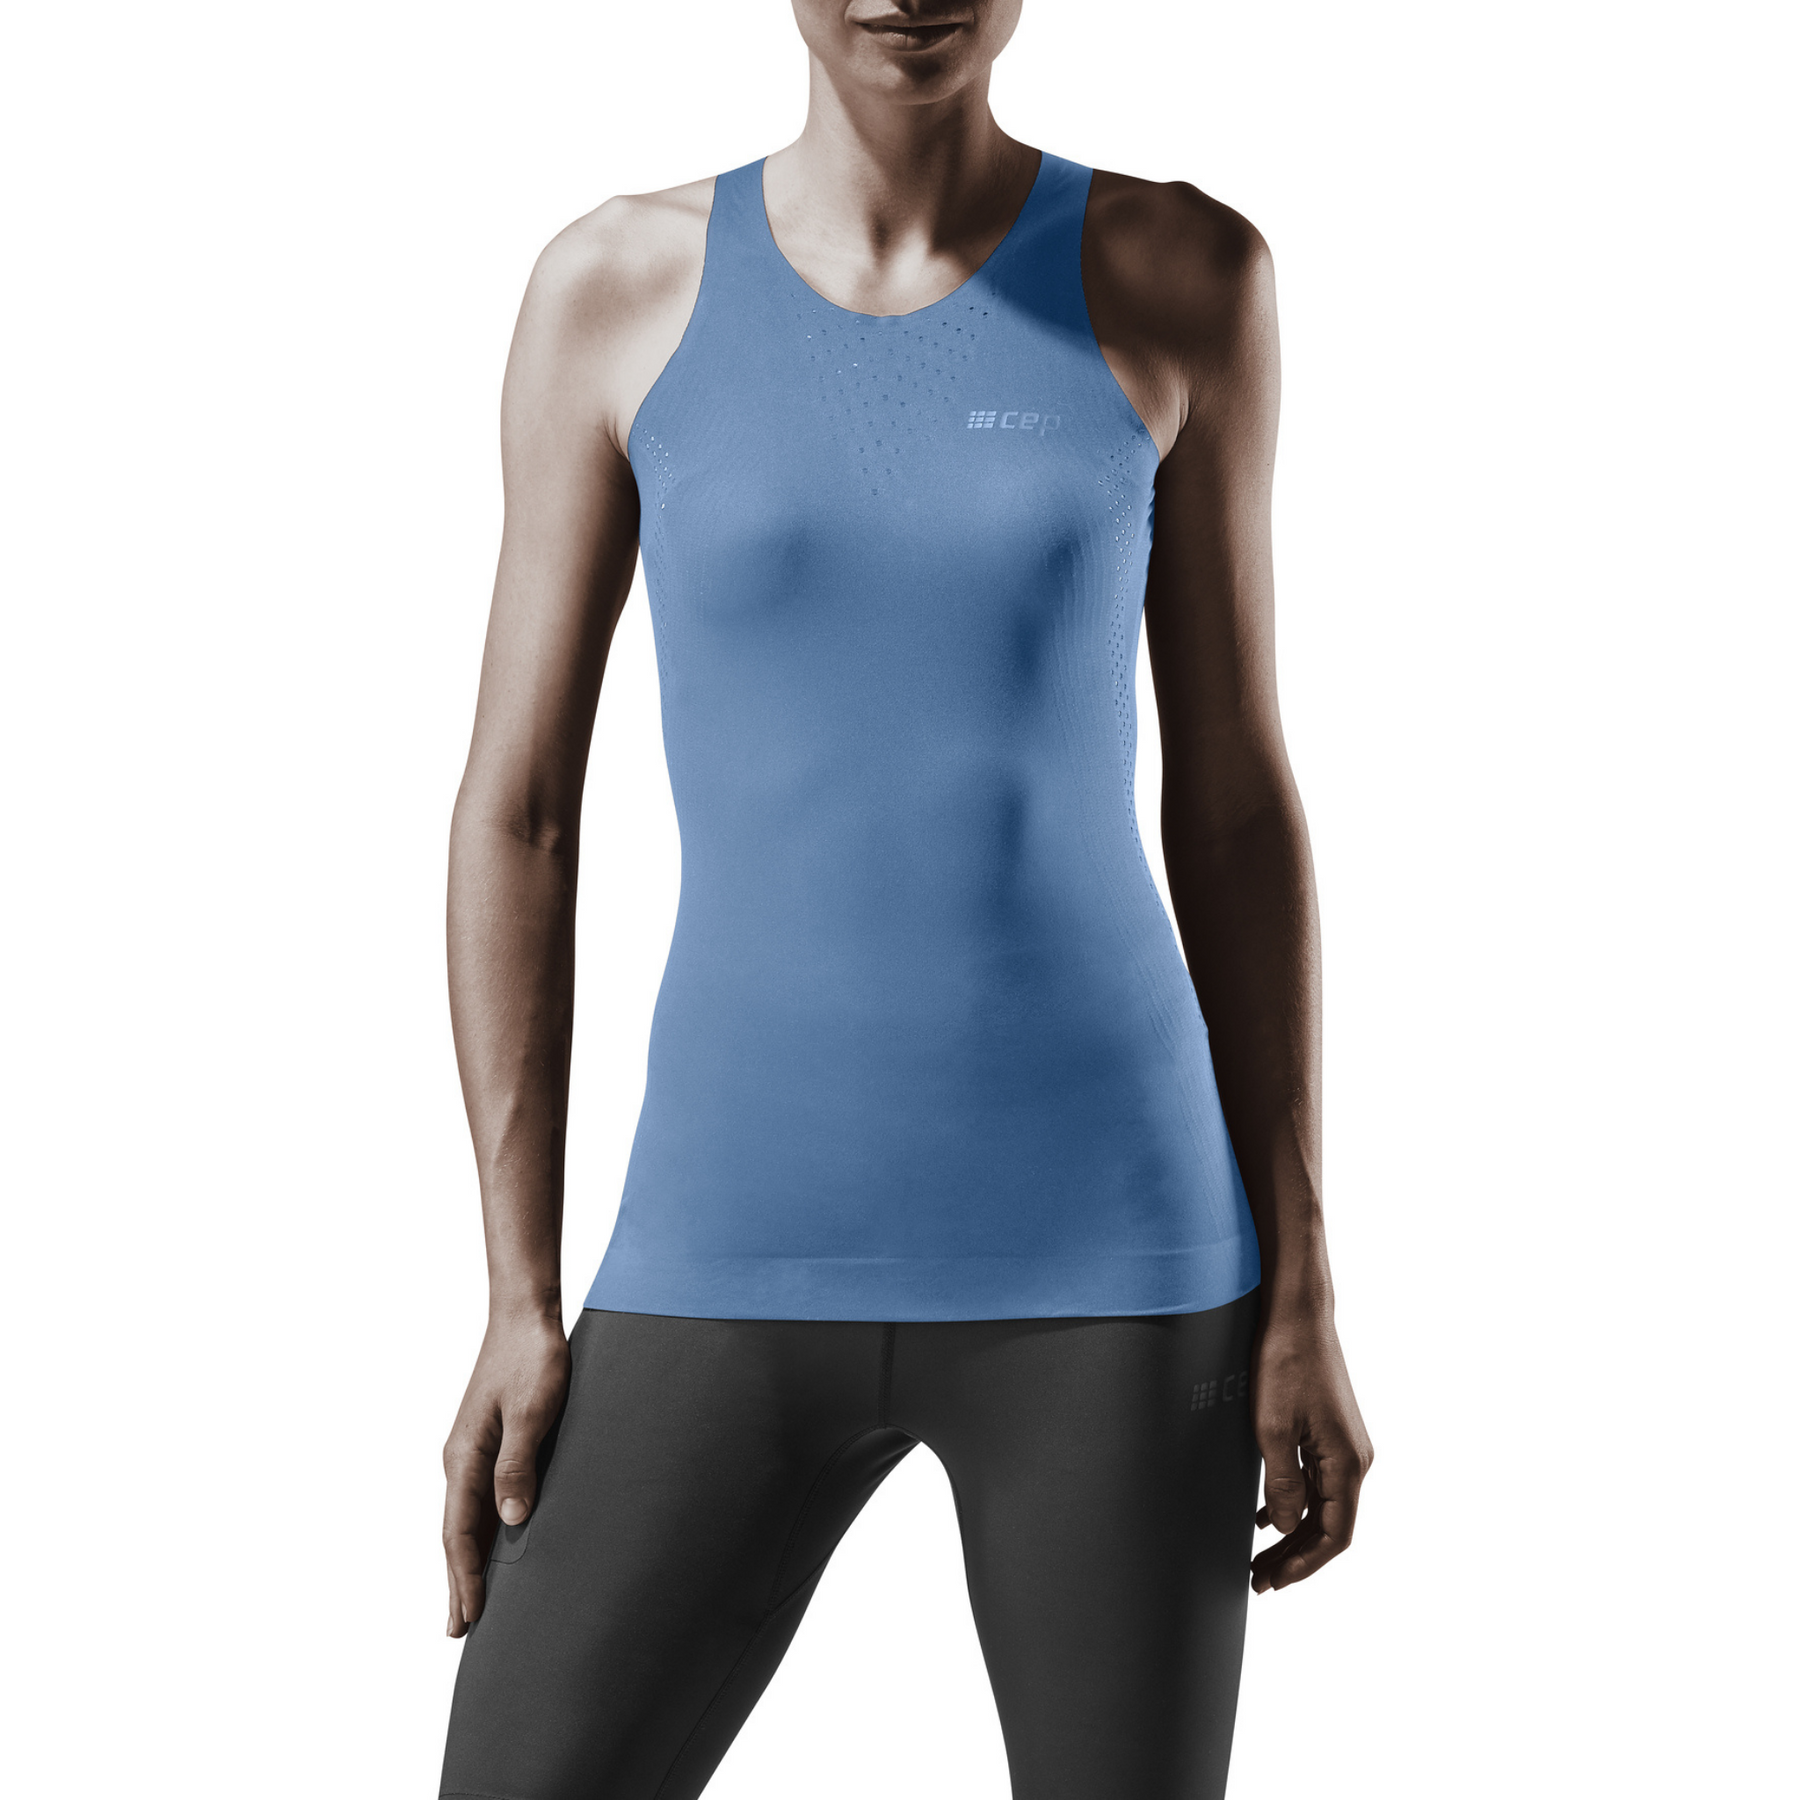 Artist Unknown Women's Compression Tank Top Pack of 3,Black(Blue